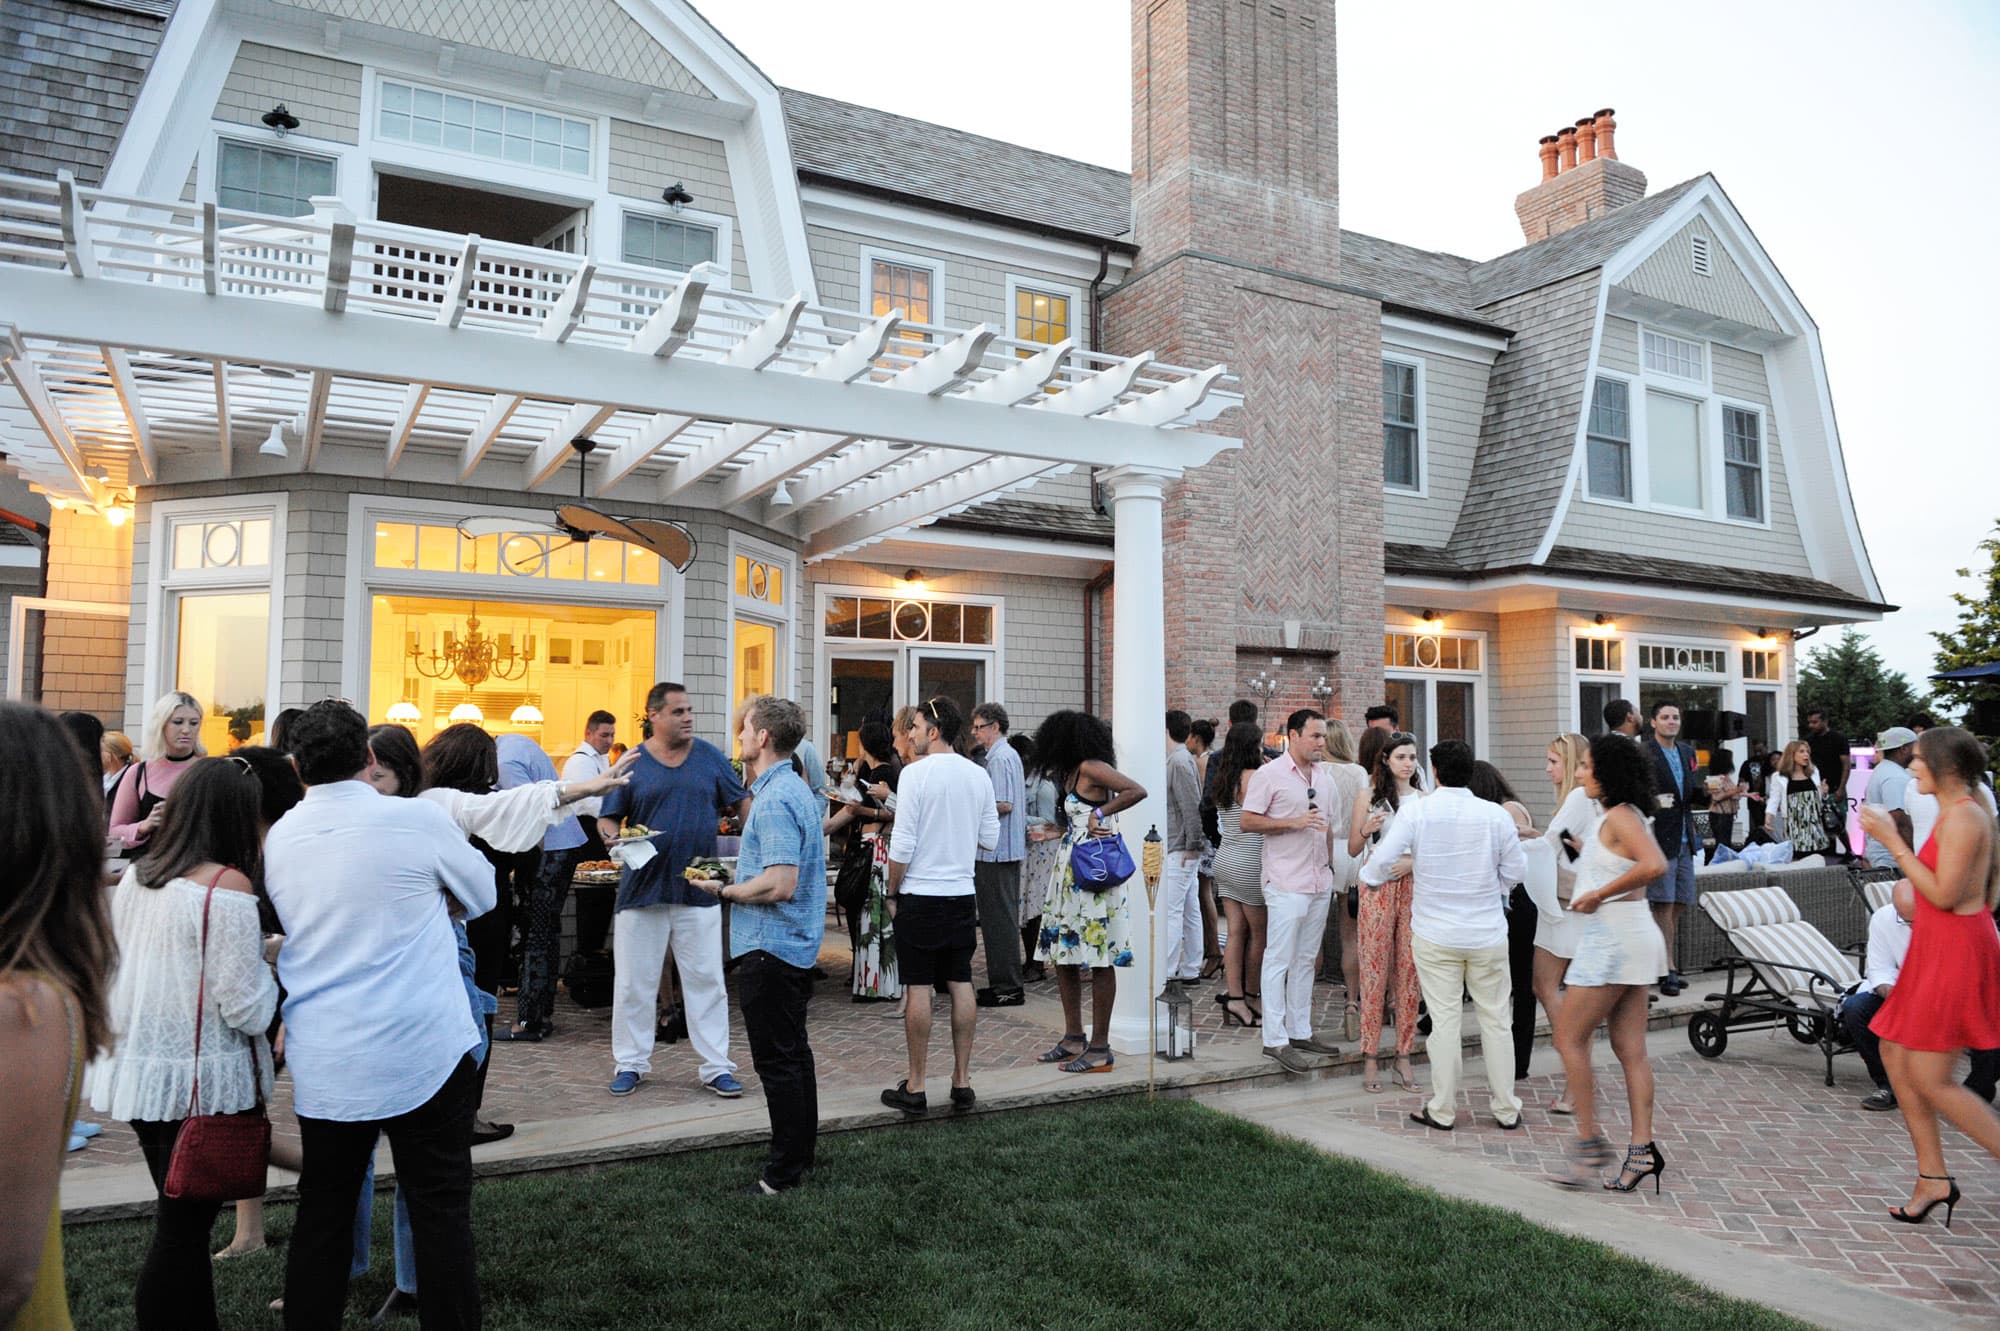 New York’s Ritzy Hamptons Plays Host to Over a Dozen Political Fundraisers This Month as Midterms Approach – NBC Los Angeles